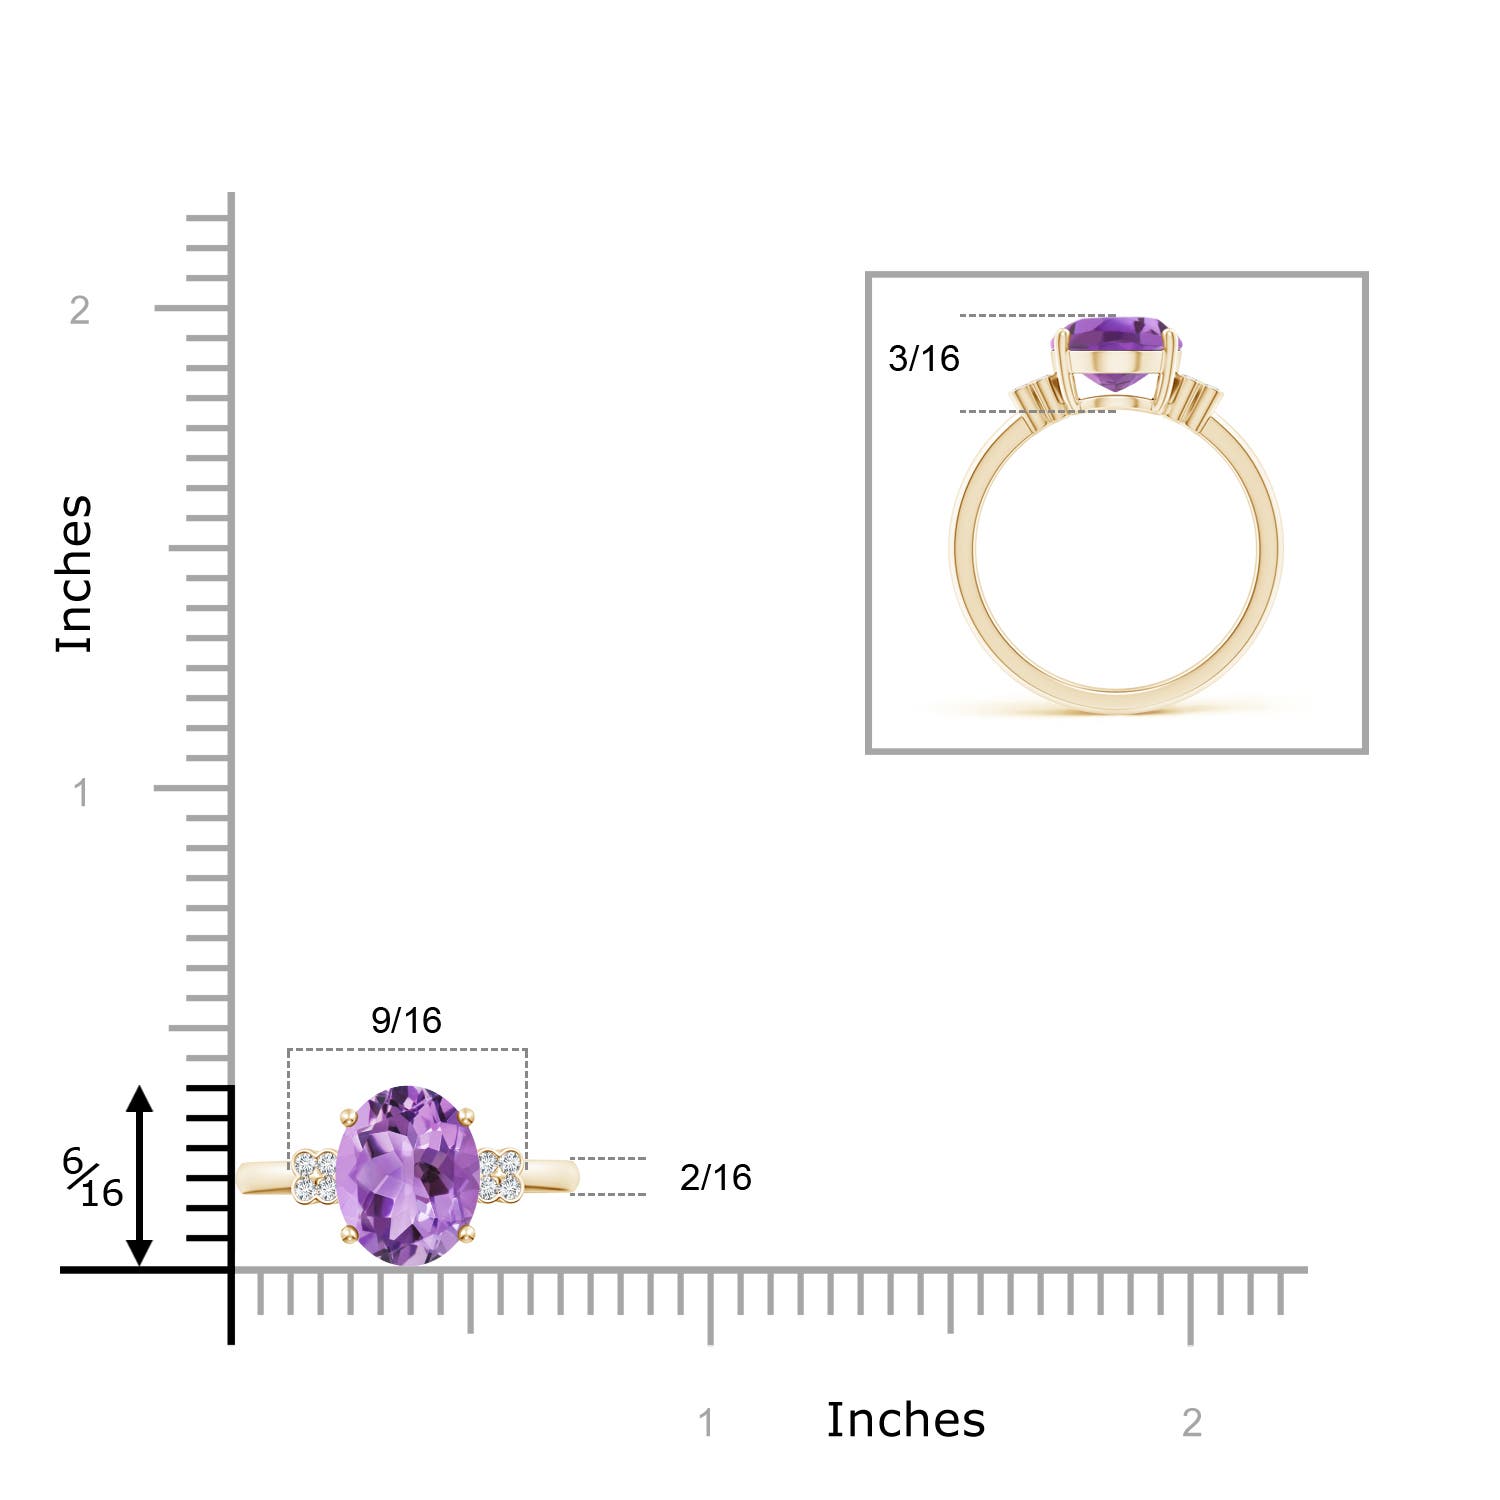 A - Amethyst / 2.36 CT / 14 KT Yellow Gold